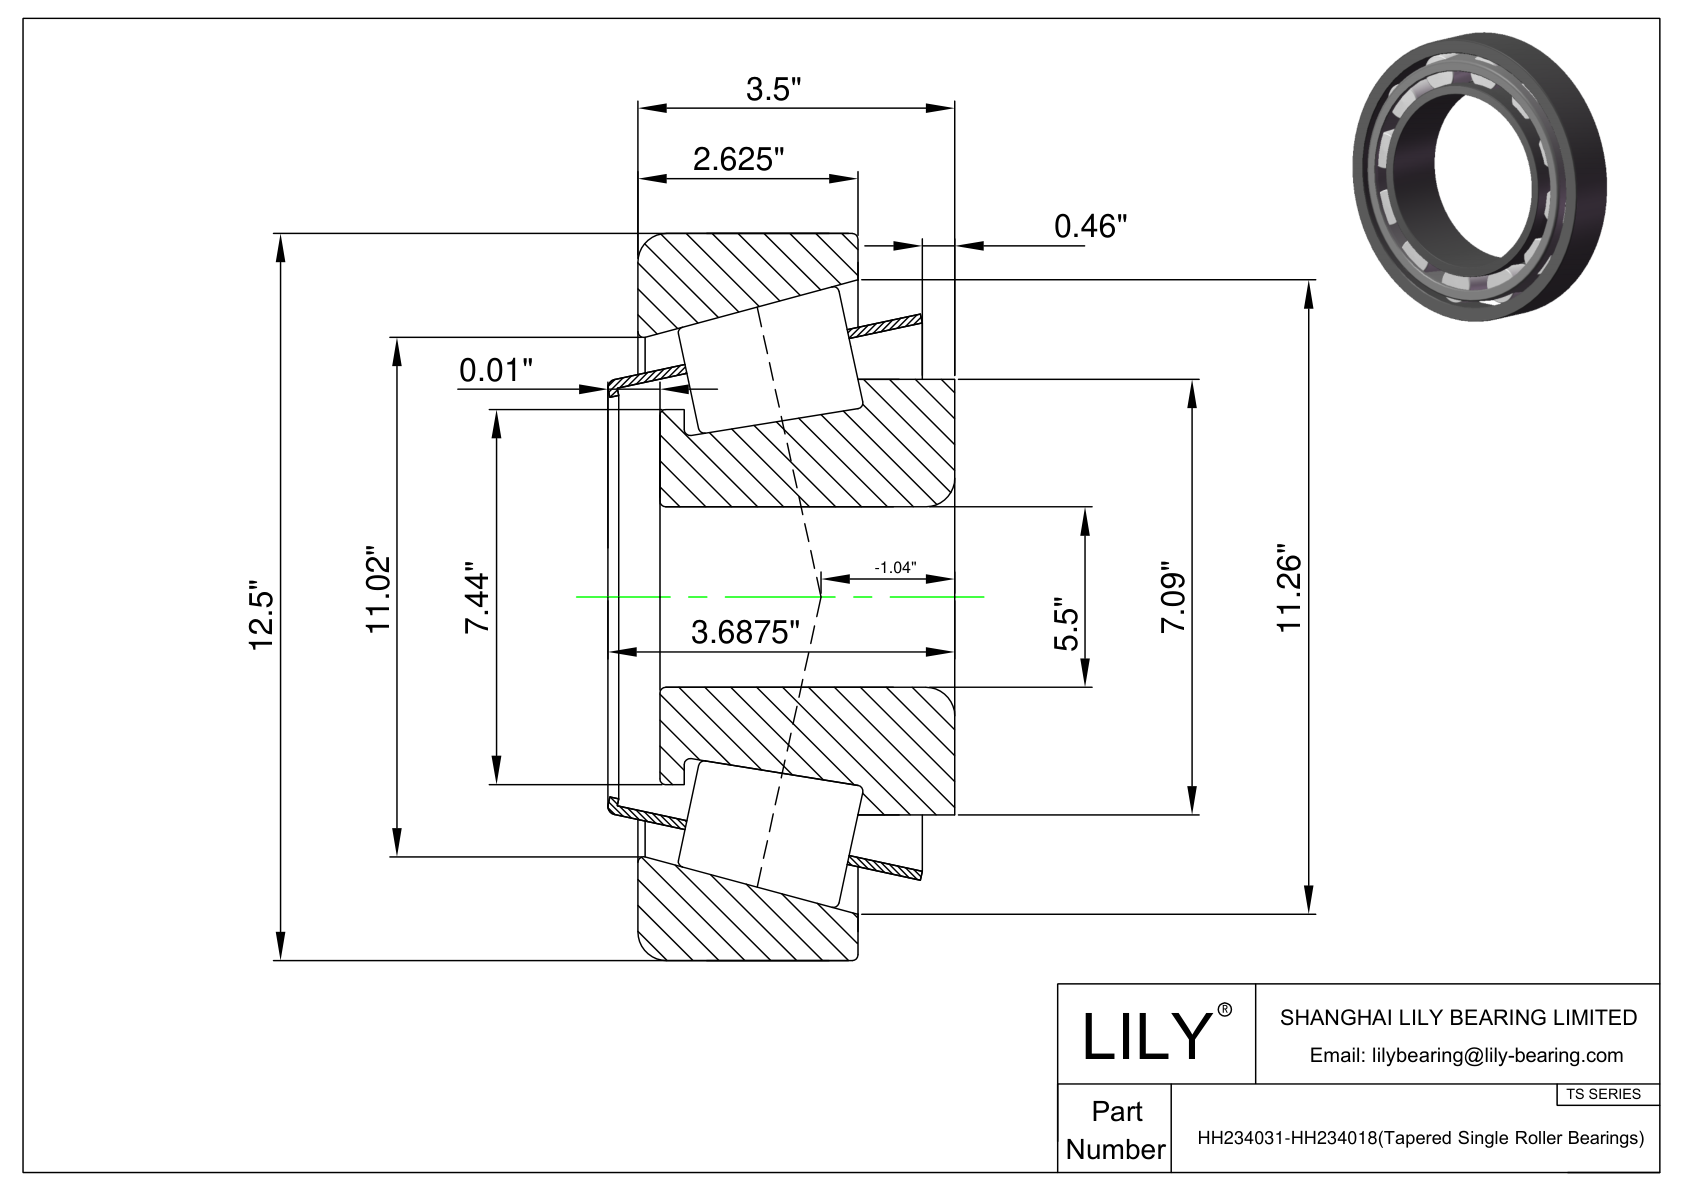 HH234031-HH234018 TS (Tapered Single Roller Bearings) (Imperial) cad drawing